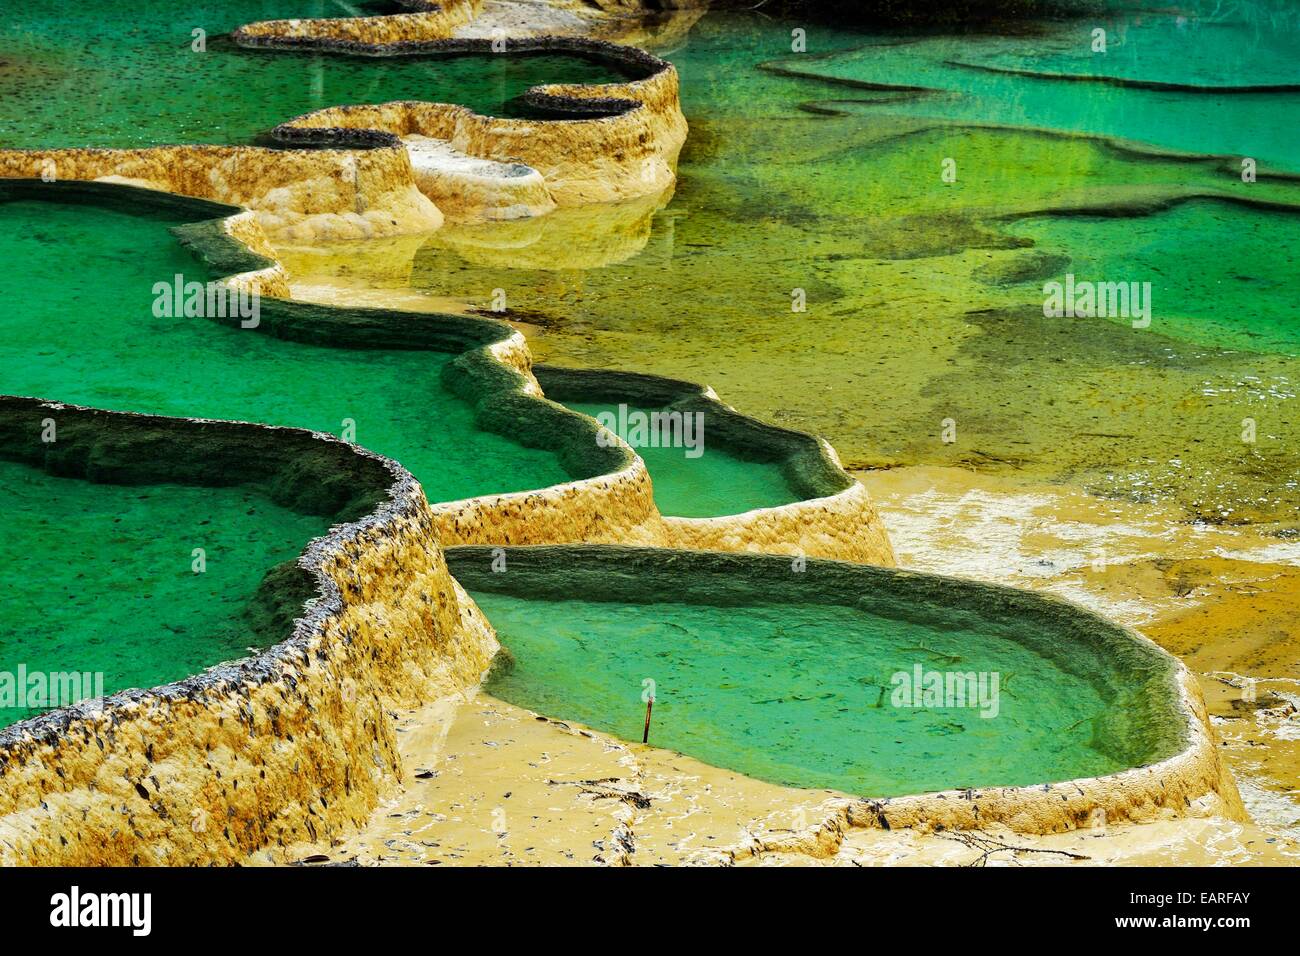 Lime terraces with lakes, Huanglong National Park, Sichuan Province, China Stock Photo